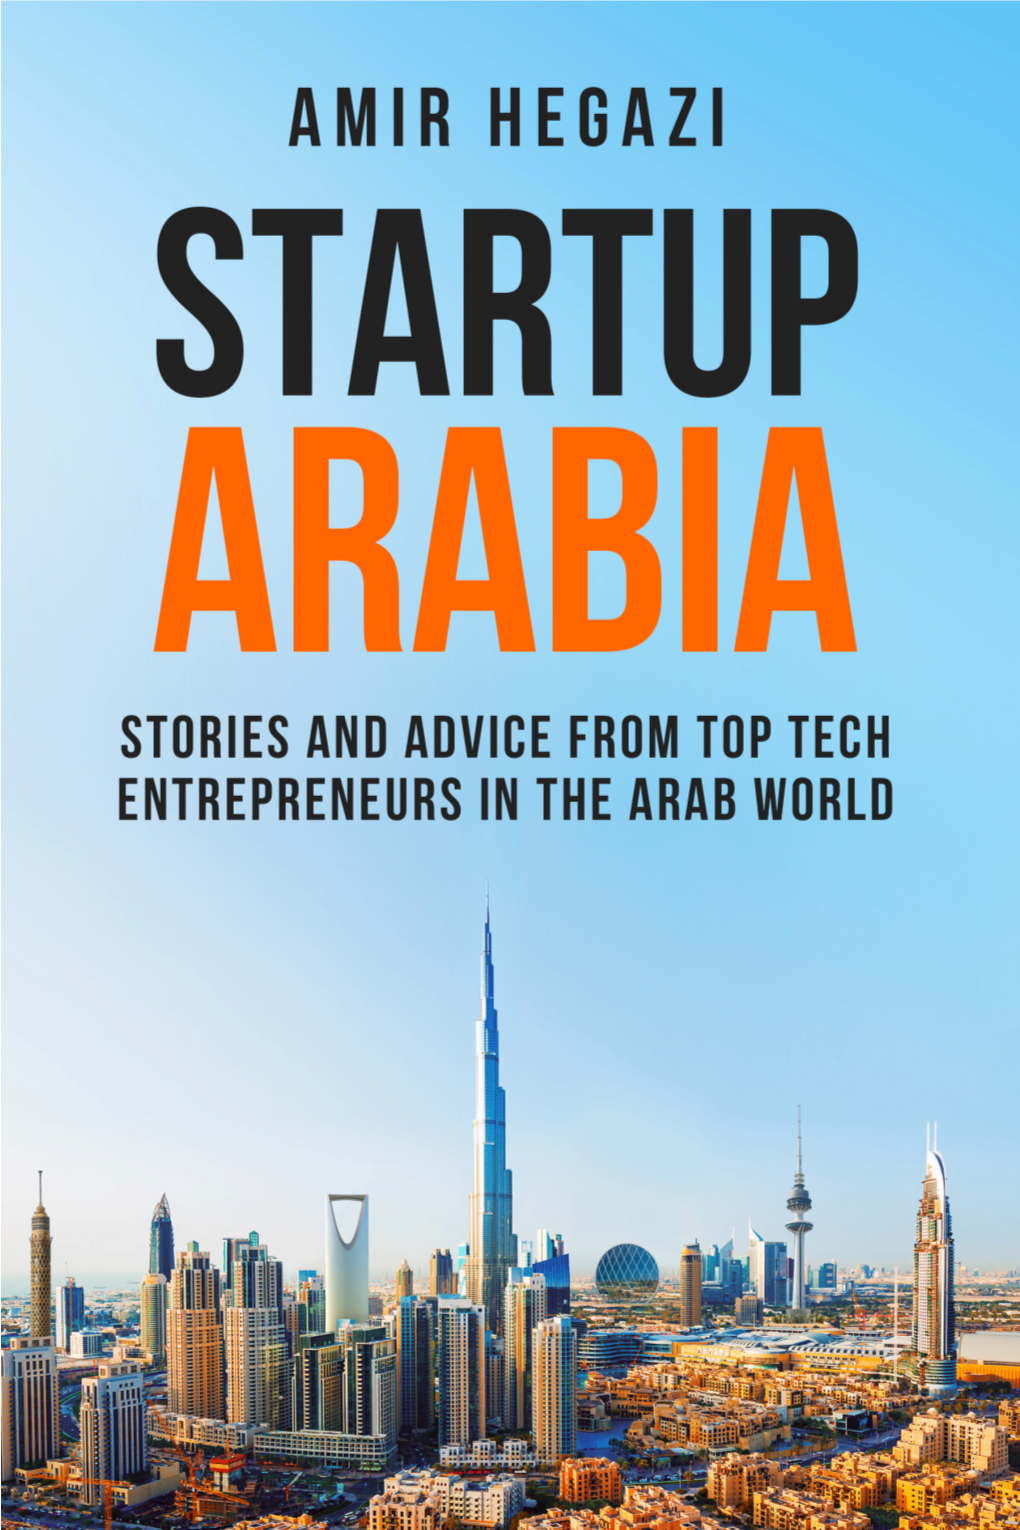 Startup Arabia: Stories and Advice from Top Tech Entrepreneurs in the Arab World